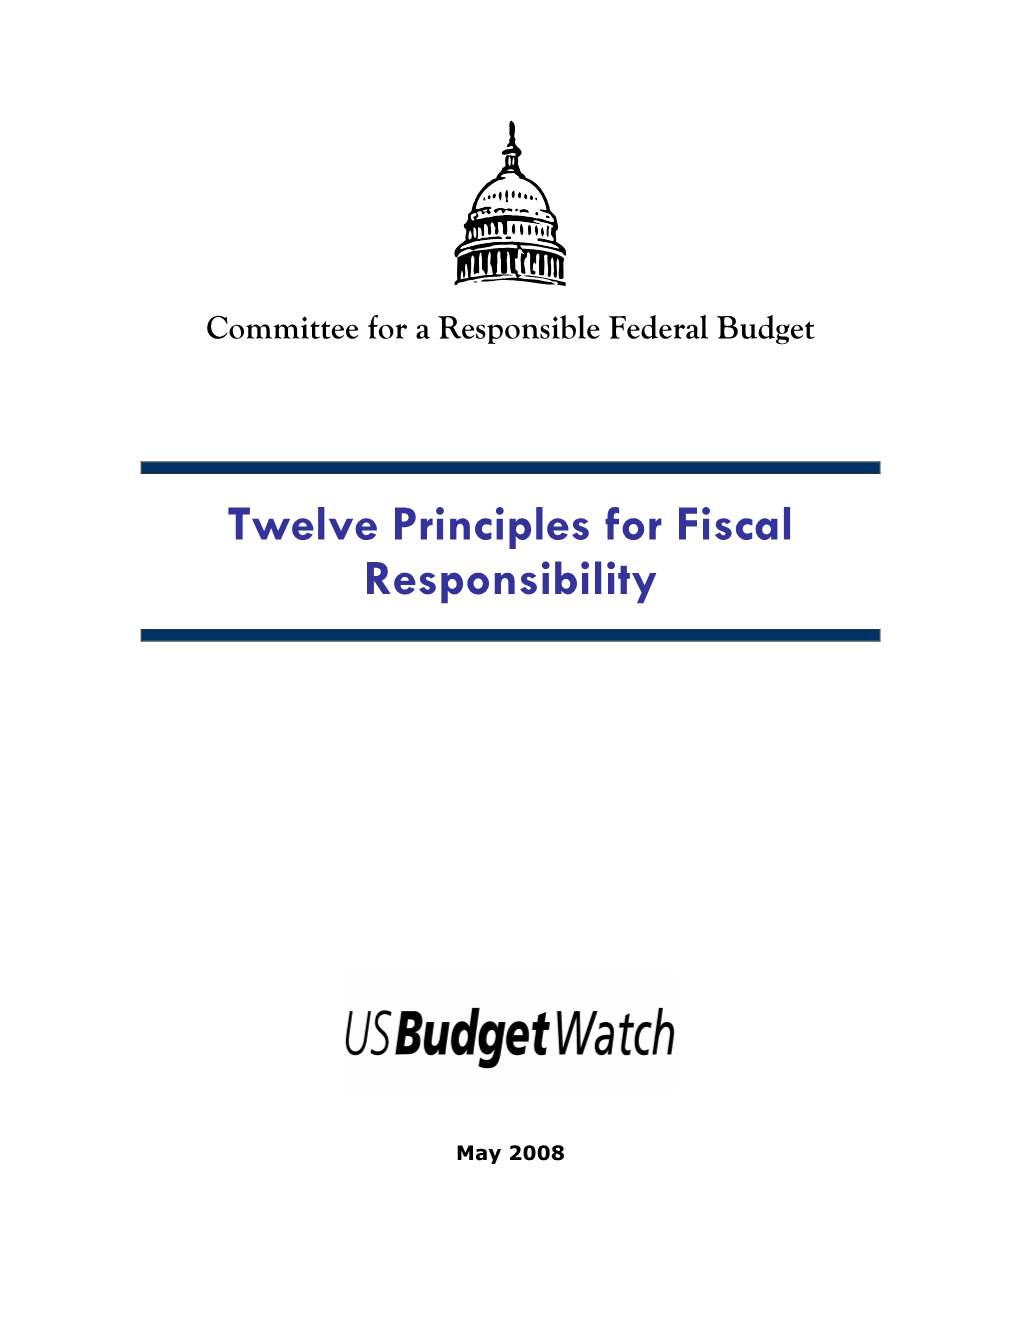 Twelve Principles for Fiscal Responsibility